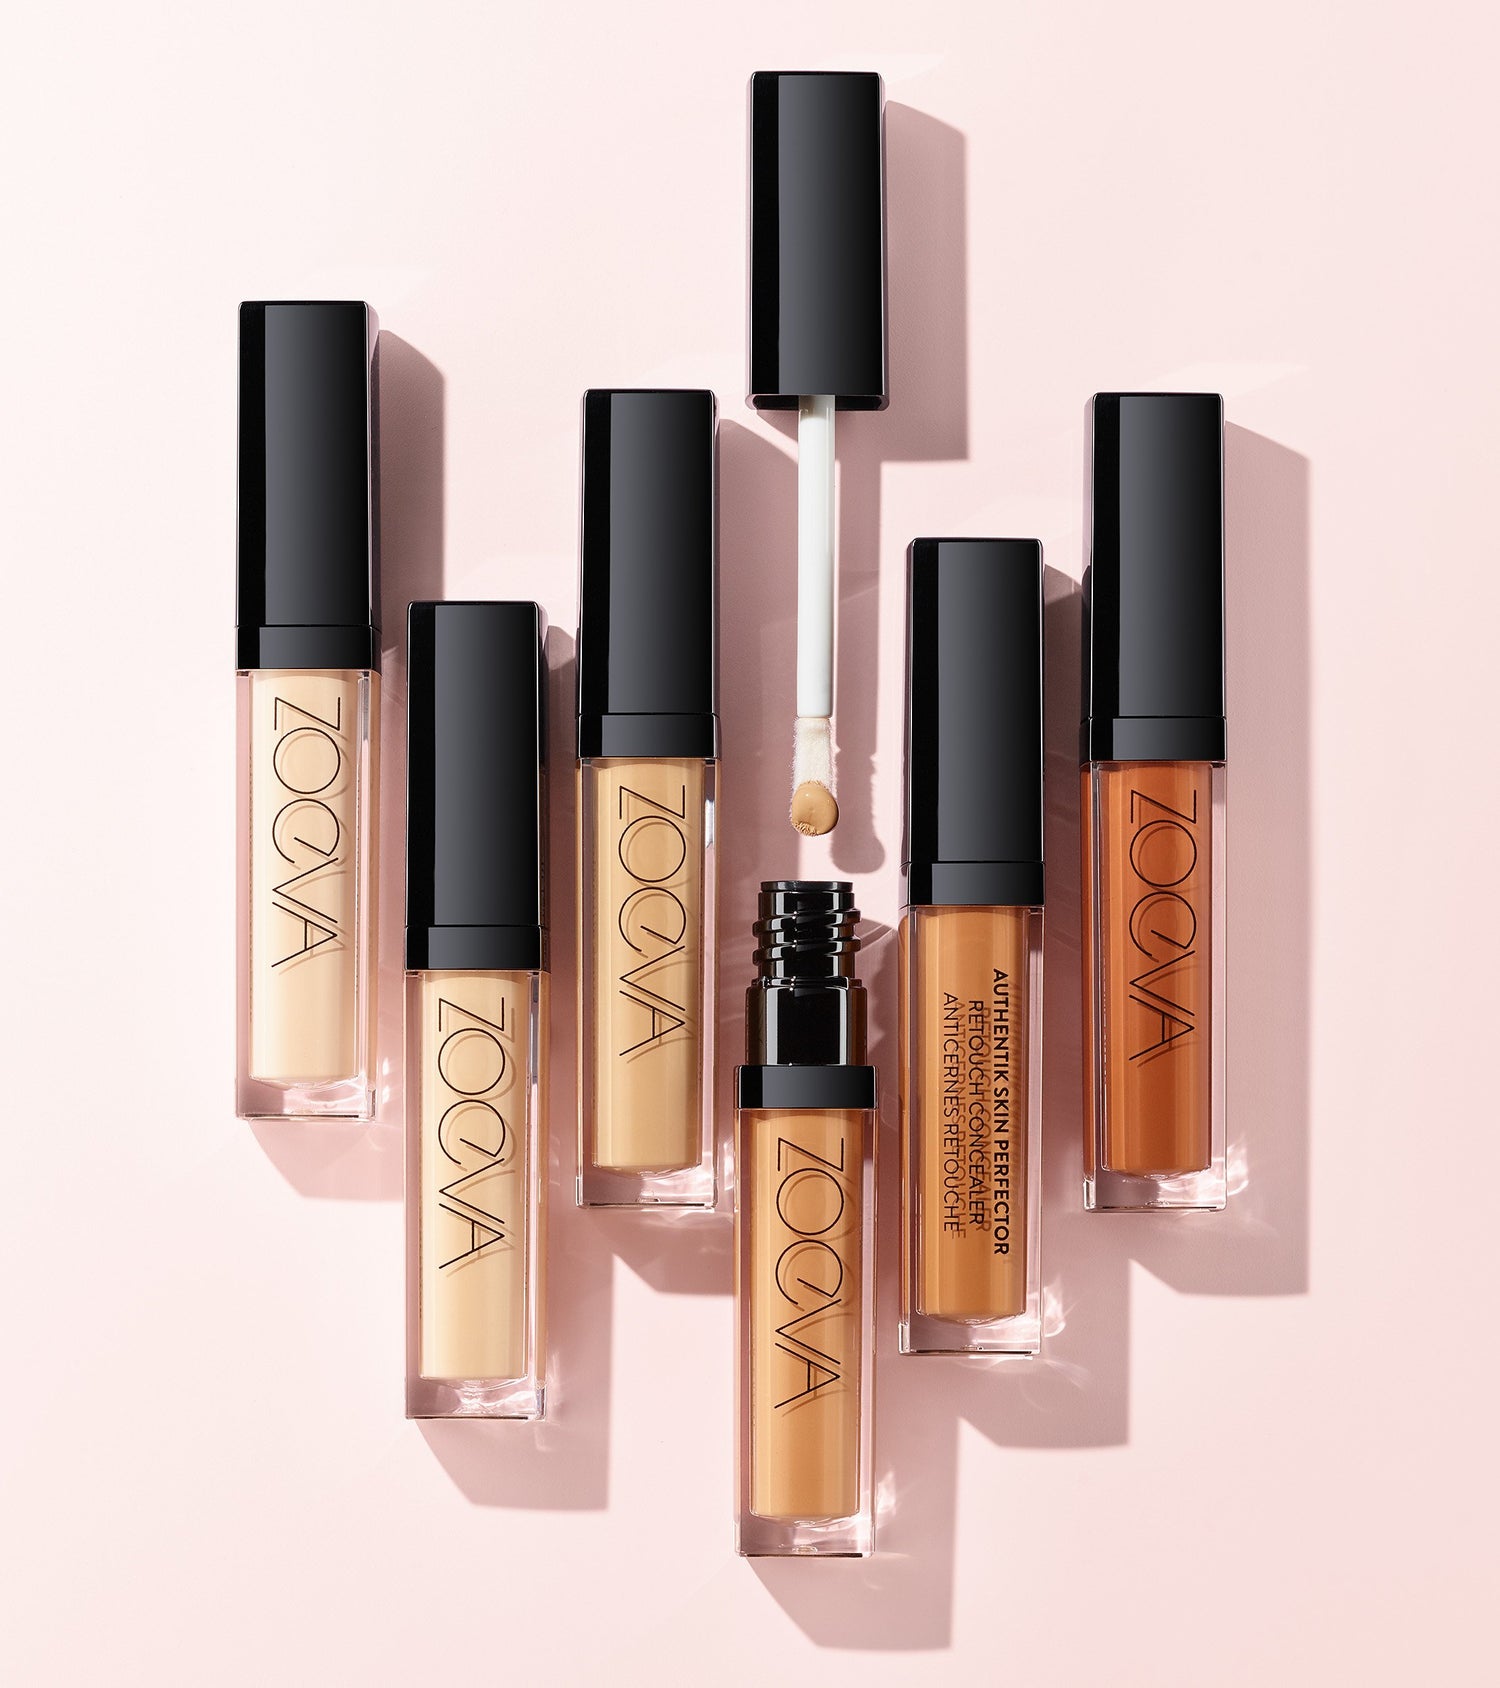 AUTHENTIK SKIN PERFECTOR CONCEALER (180 OFFICIAL) Main Image featured